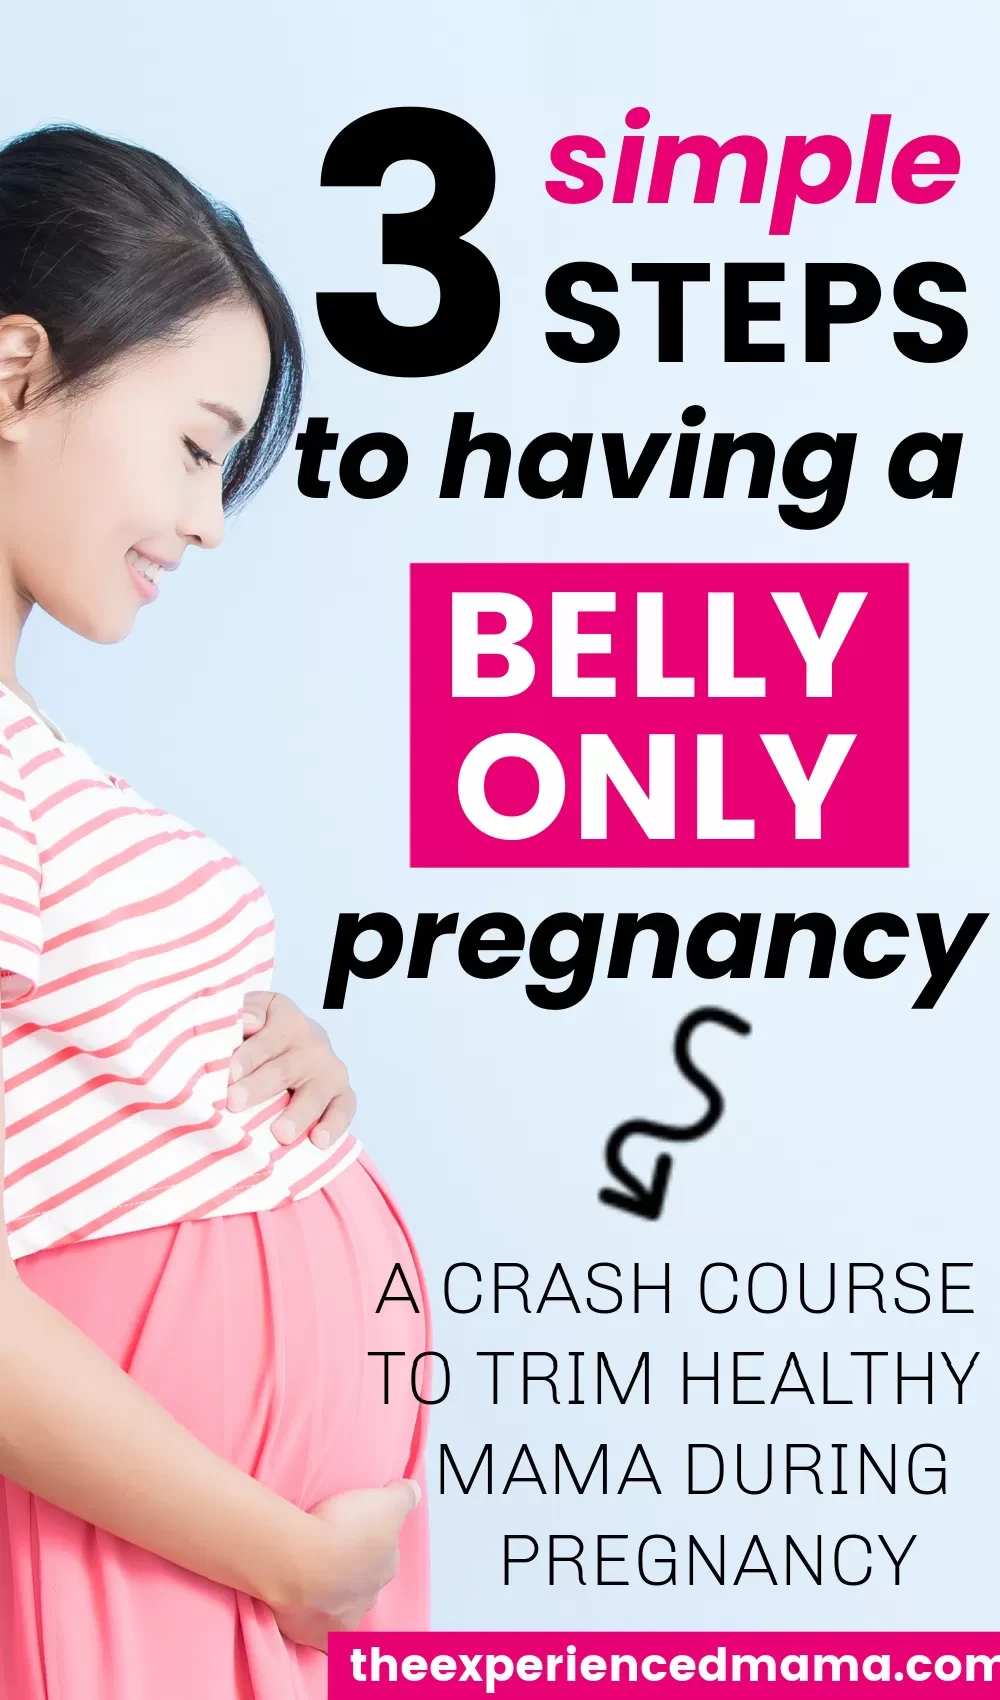 pregnant woman smiling and holding belly with text "3 steps to having a belly only pregnancy"